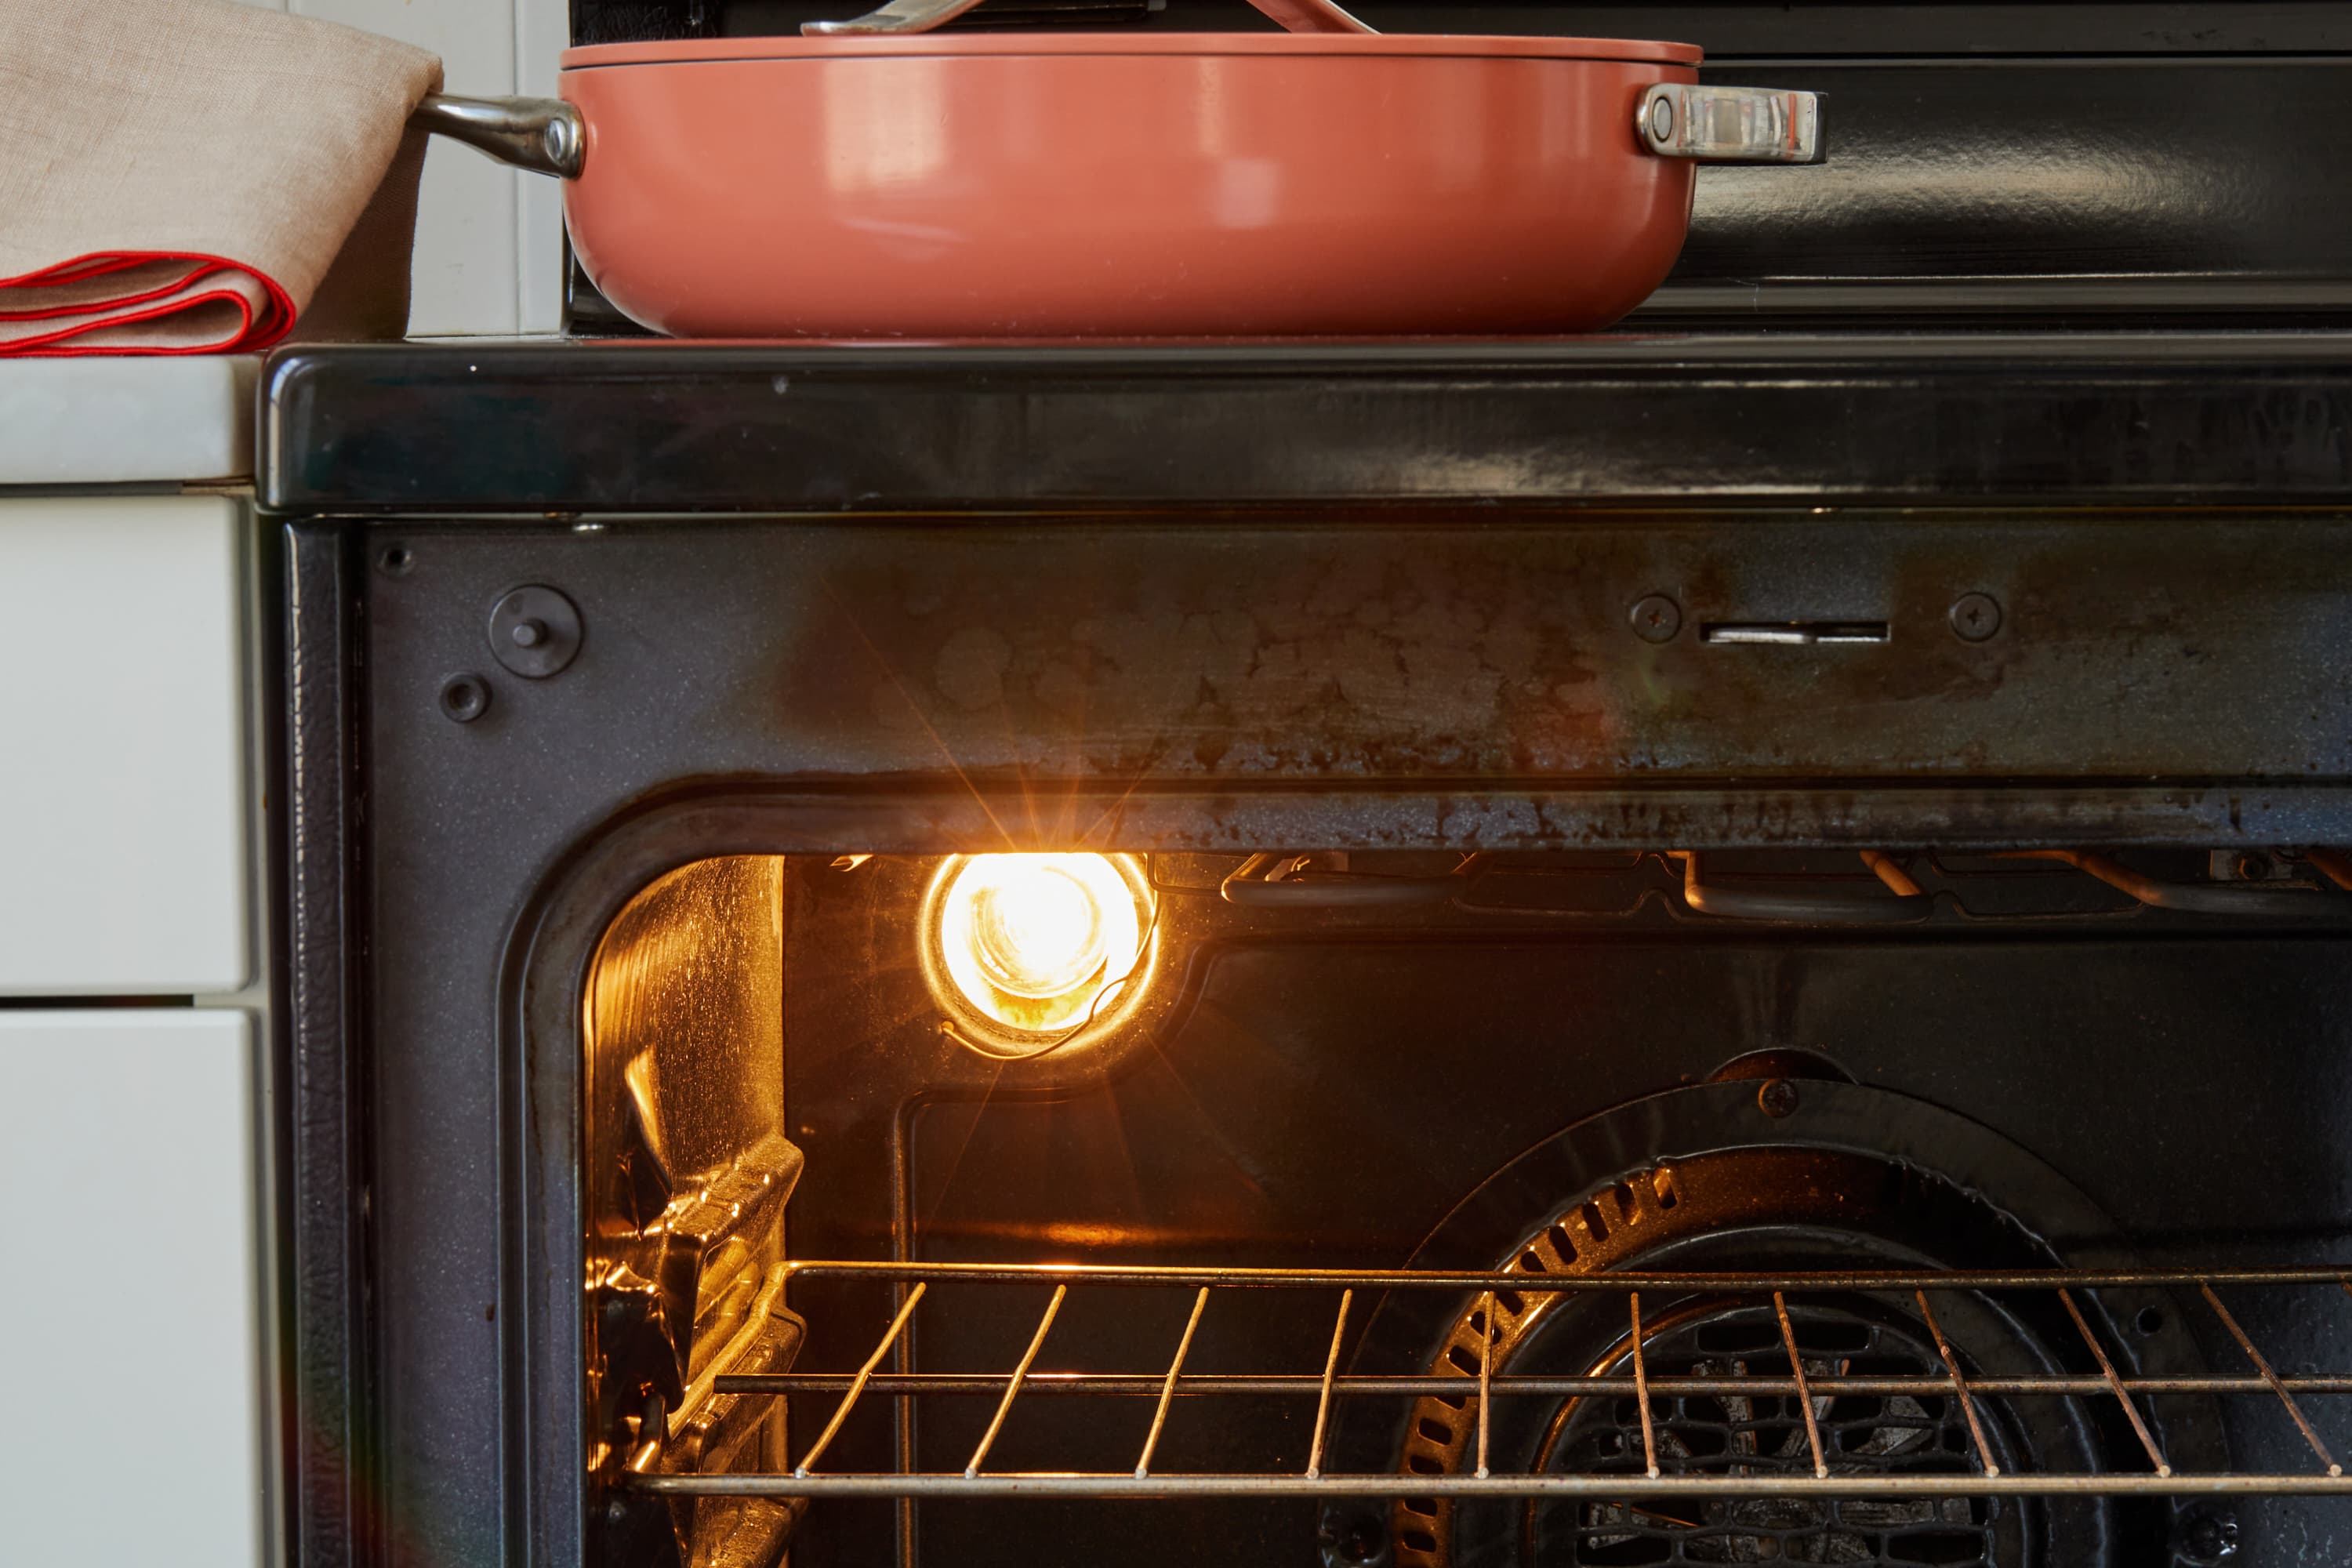 Oven Light Bulb Broken? Here's How To Replace It - VIA Appliance